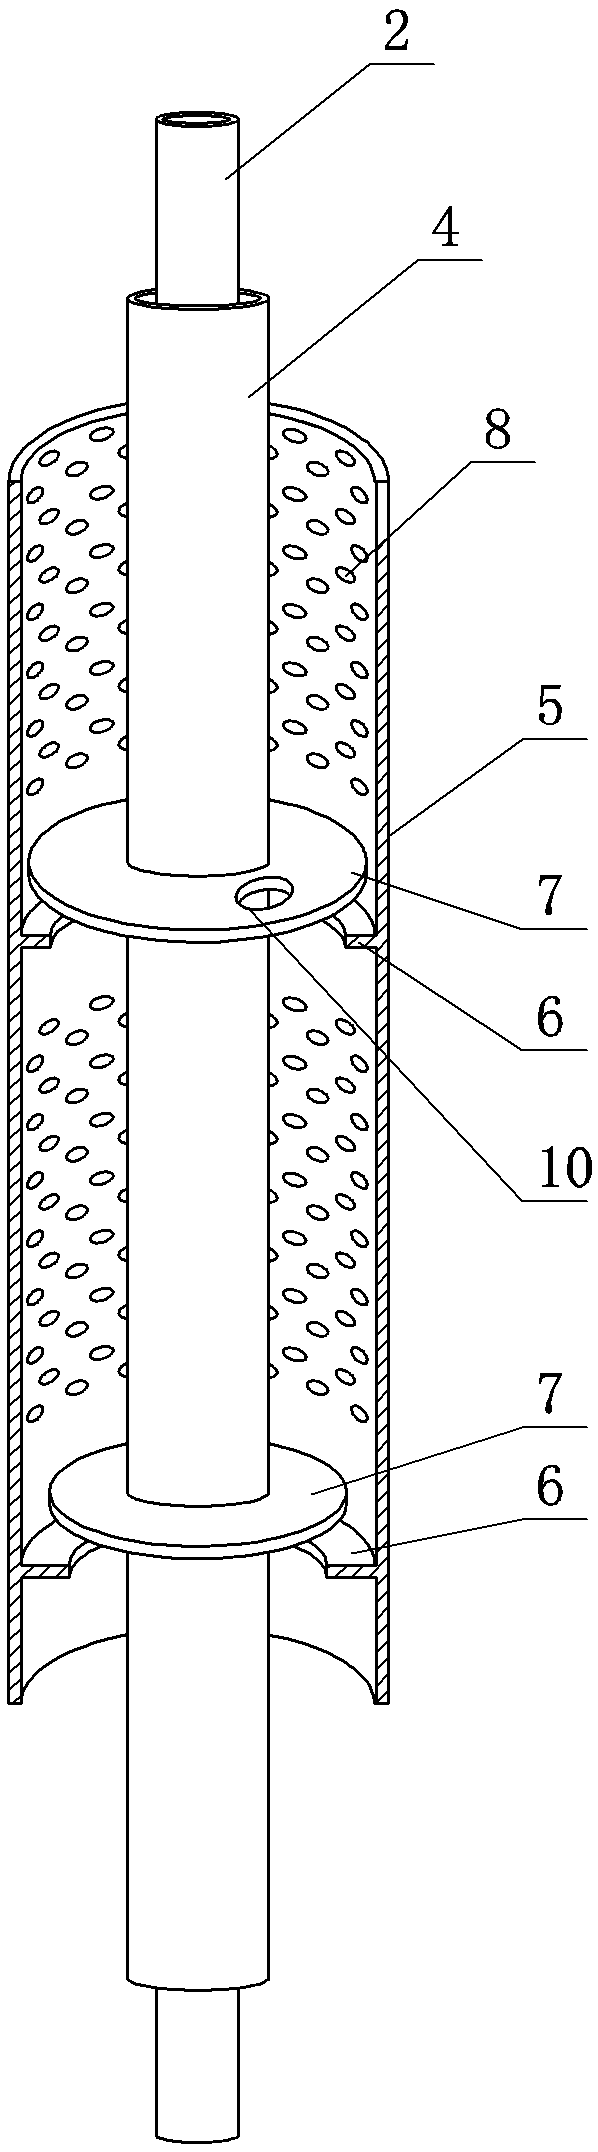 Flat plate type seal structure of water outlet and return device in same well for water source heat pump central air conditioner